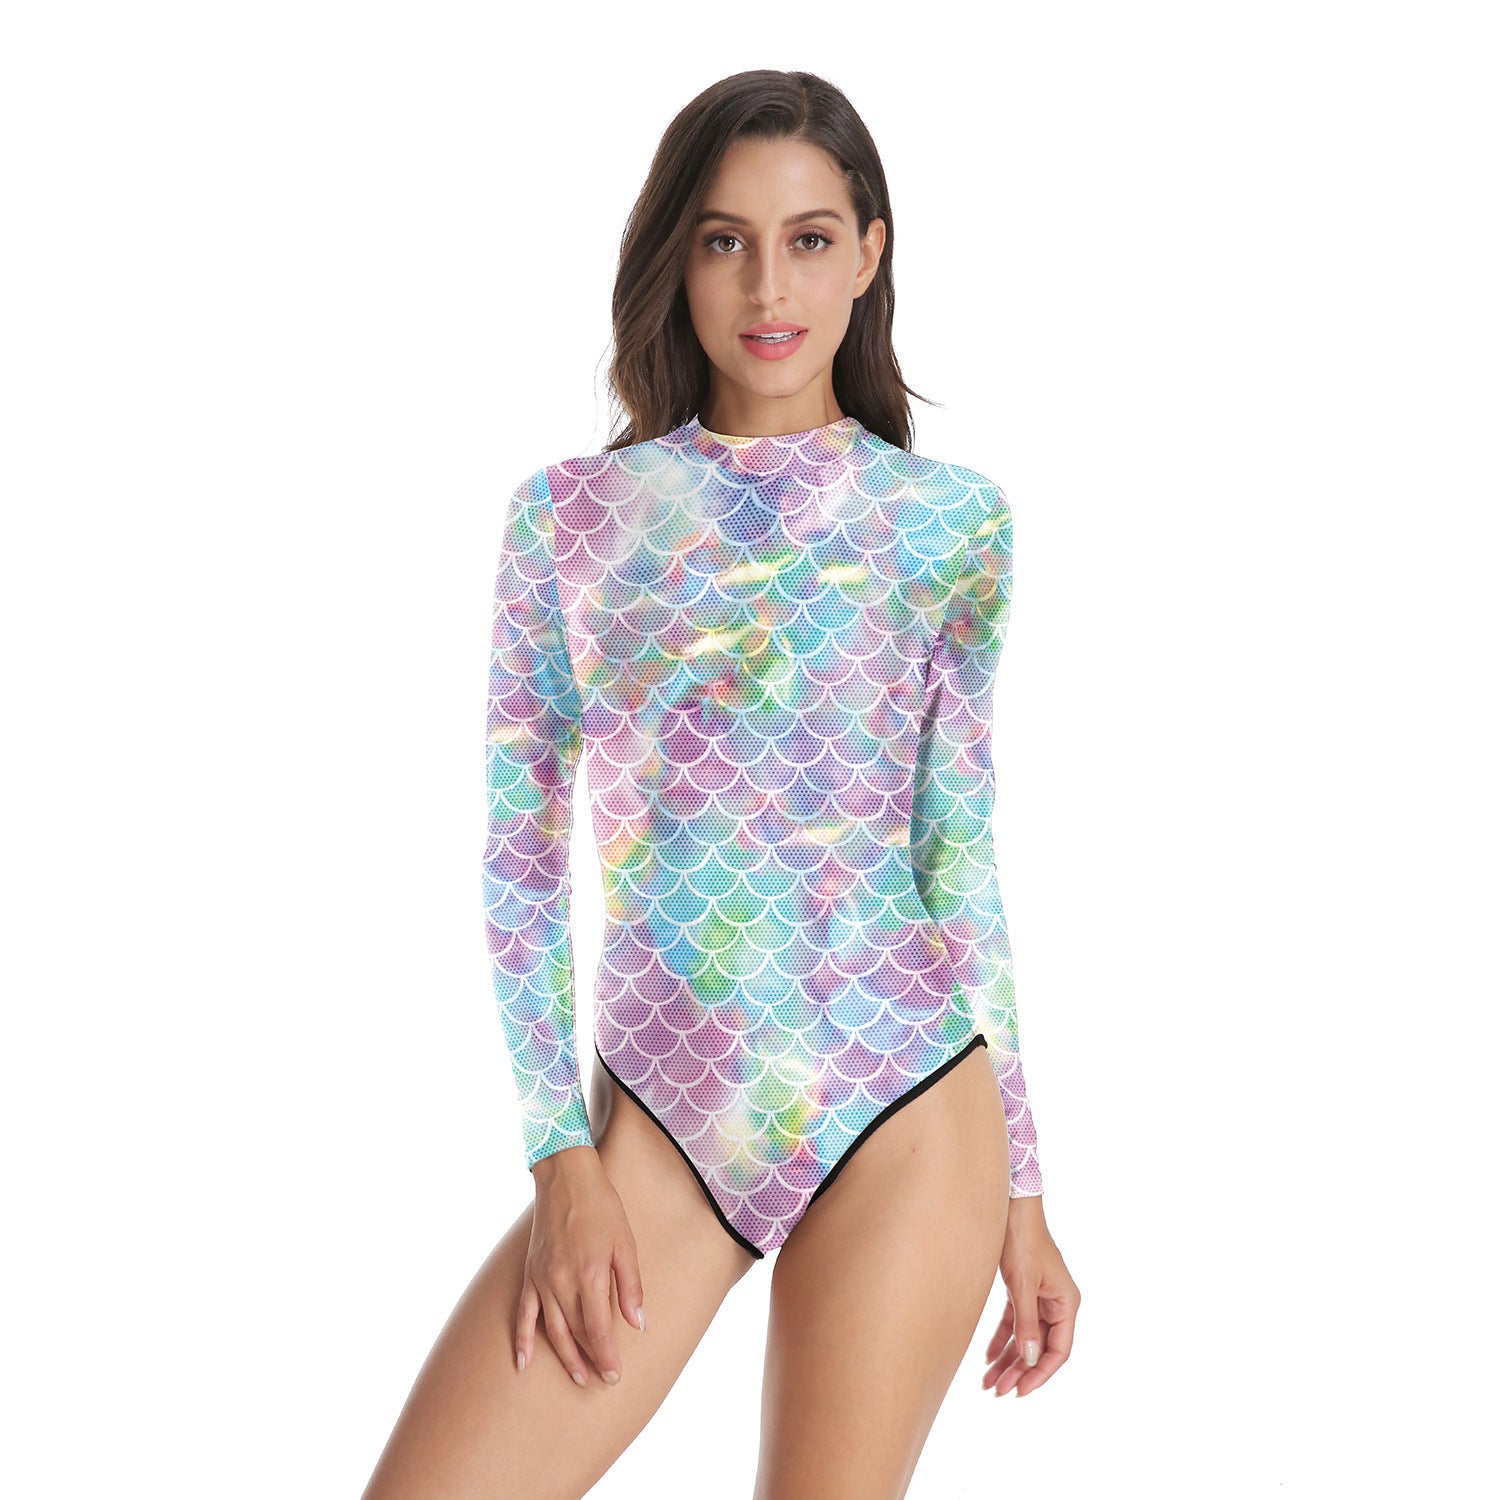 Mermaid Scales Swimsuit With Zipper